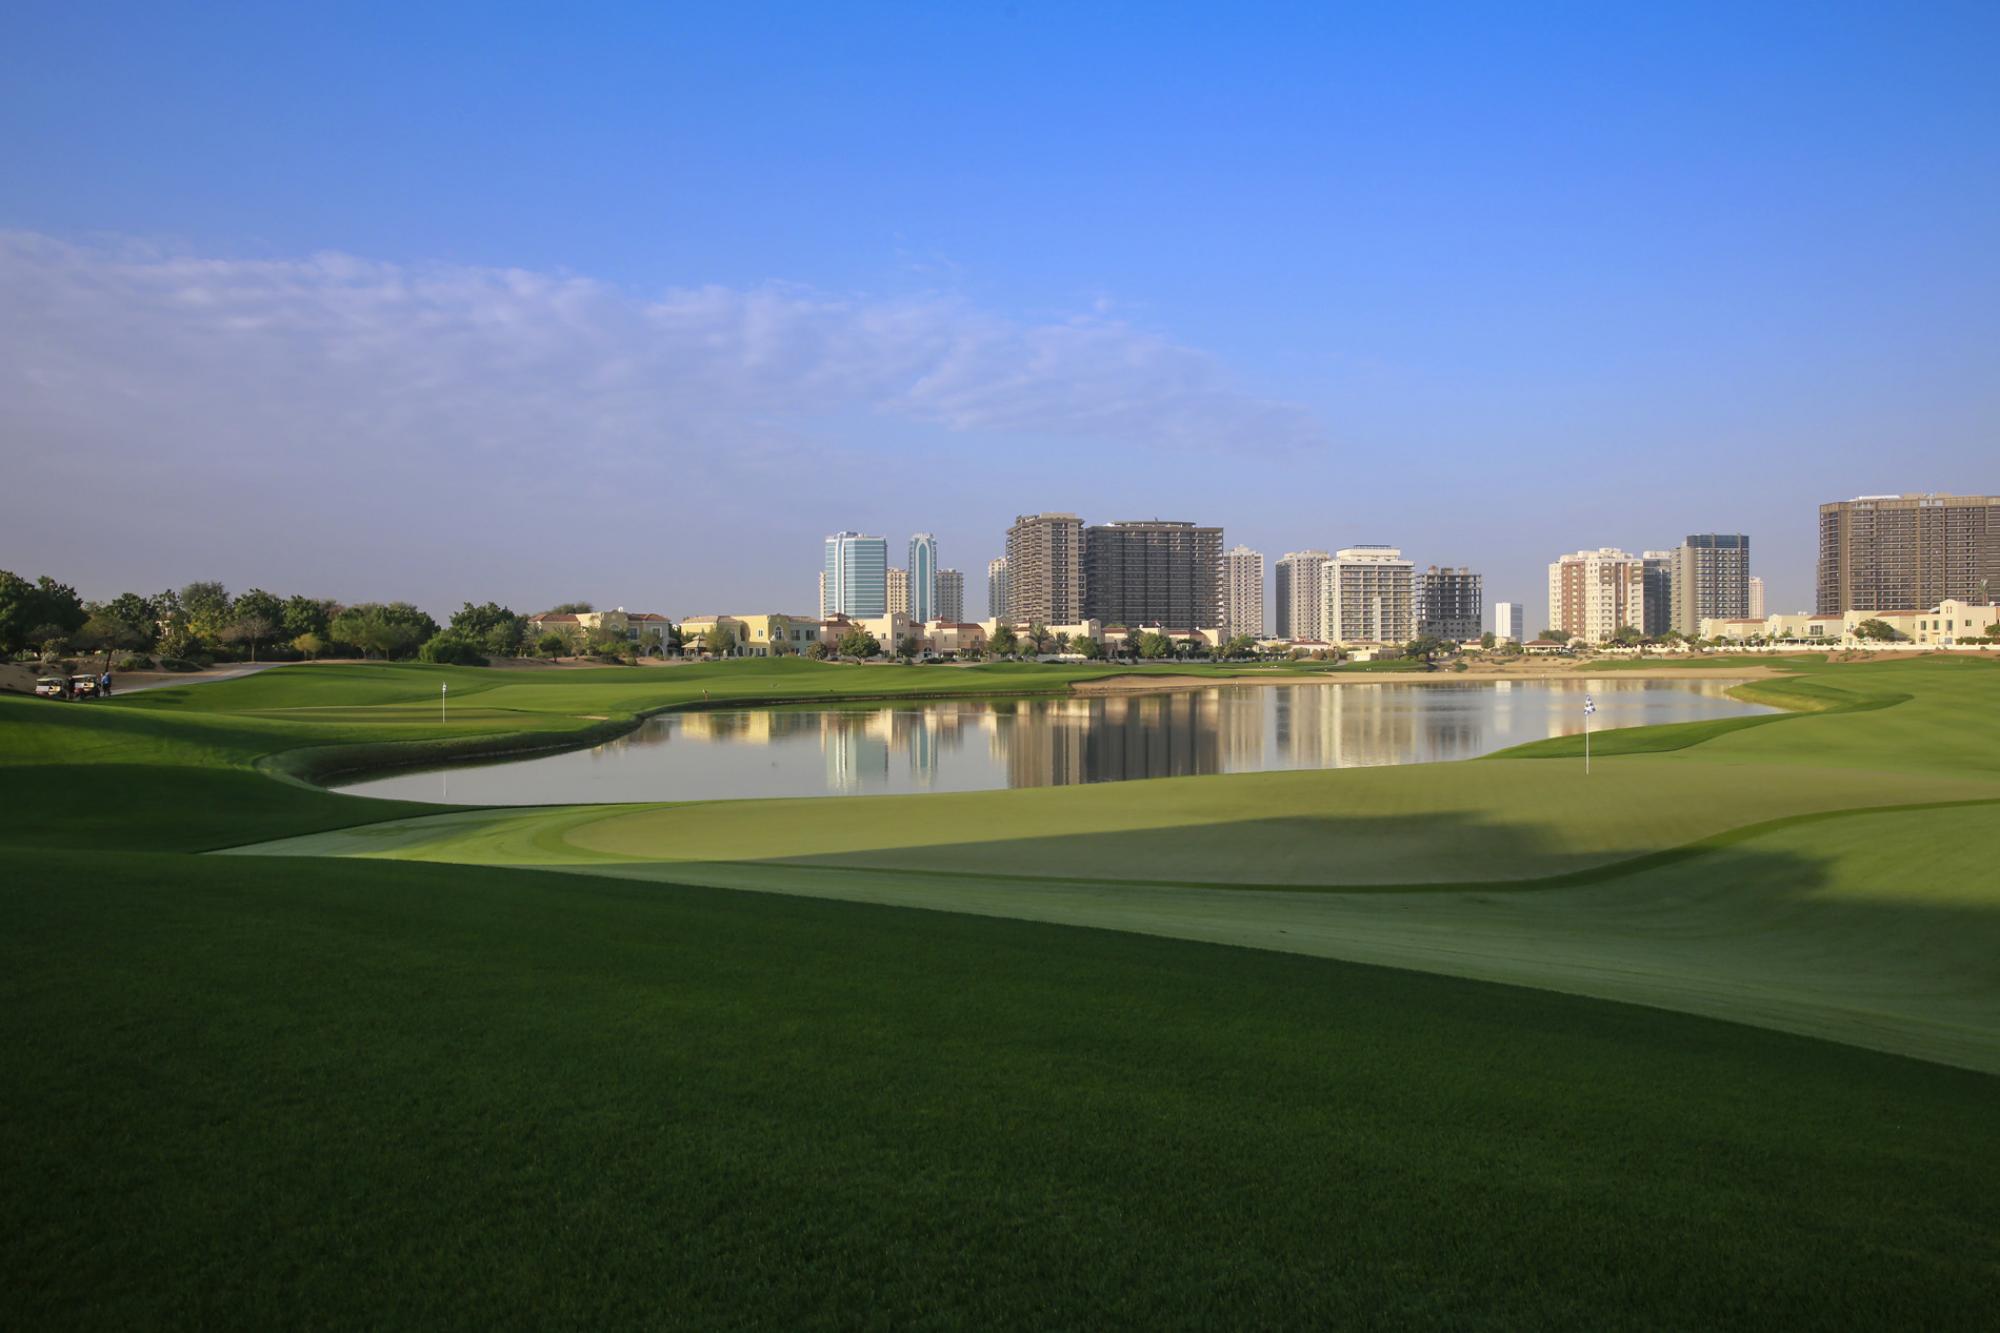 The Els Club's beautiful golf course in magnificent Dubai.